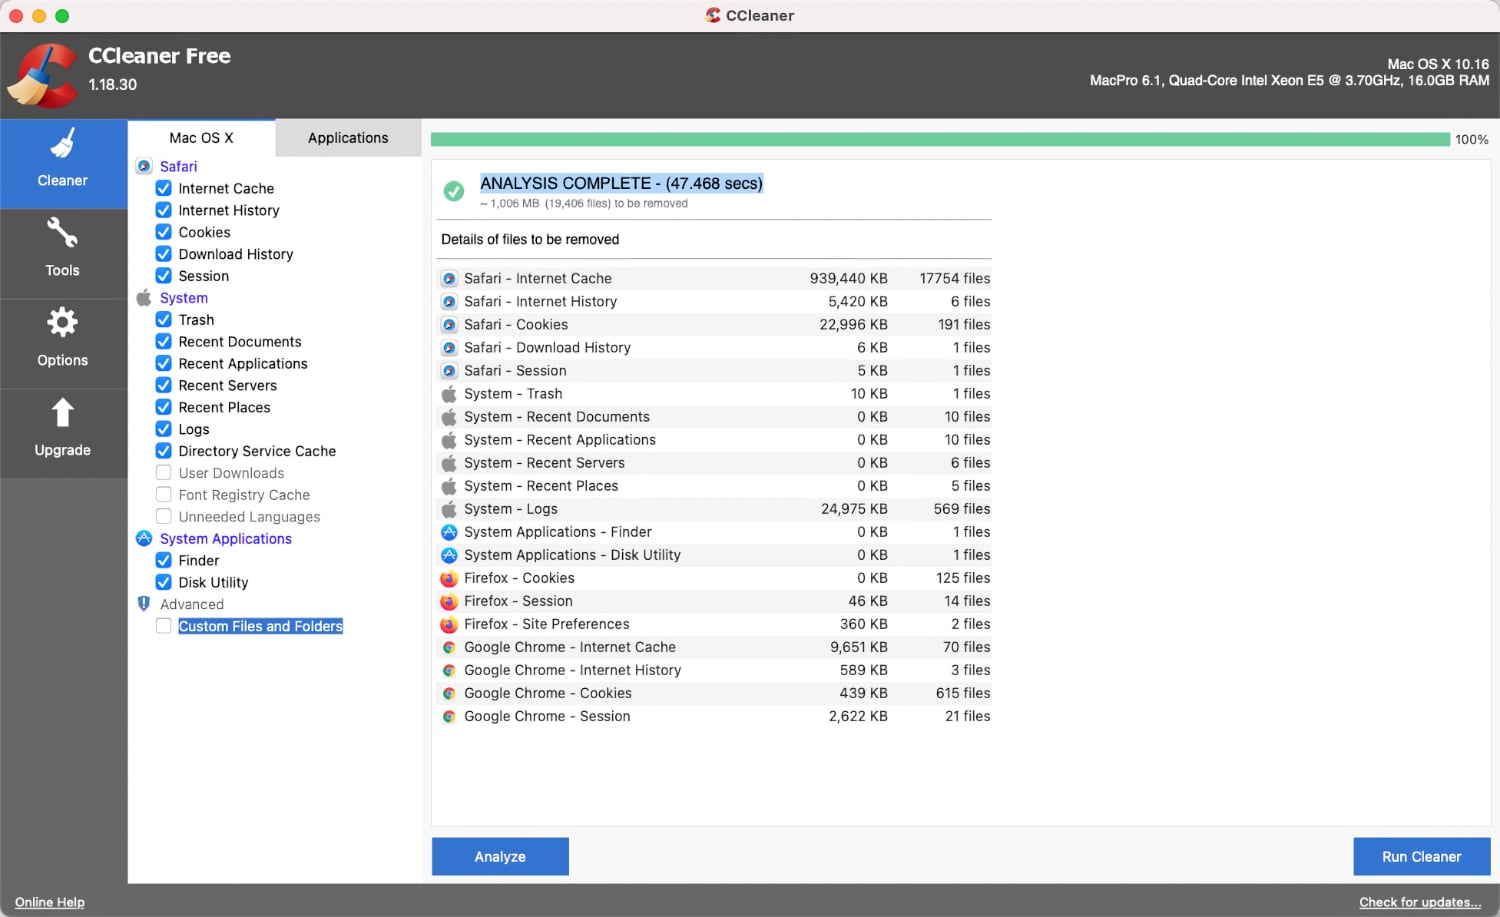 ccleaner for mac has not been updated in over a year